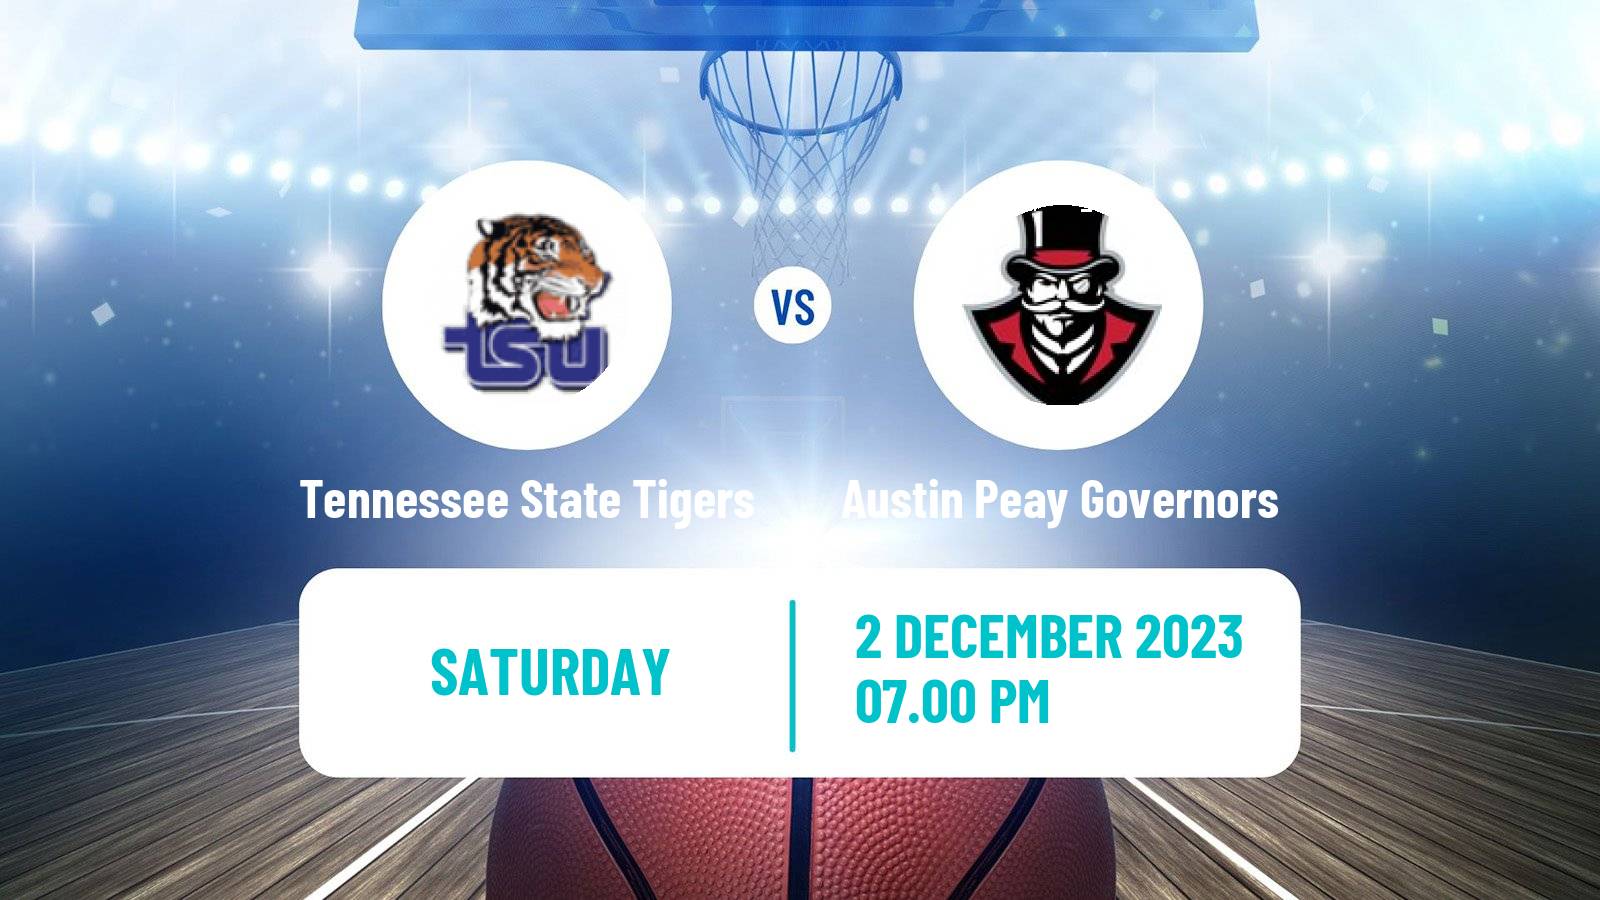 Basketball NCAA College Basketball Tennessee State Tigers - Austin Peay Governors